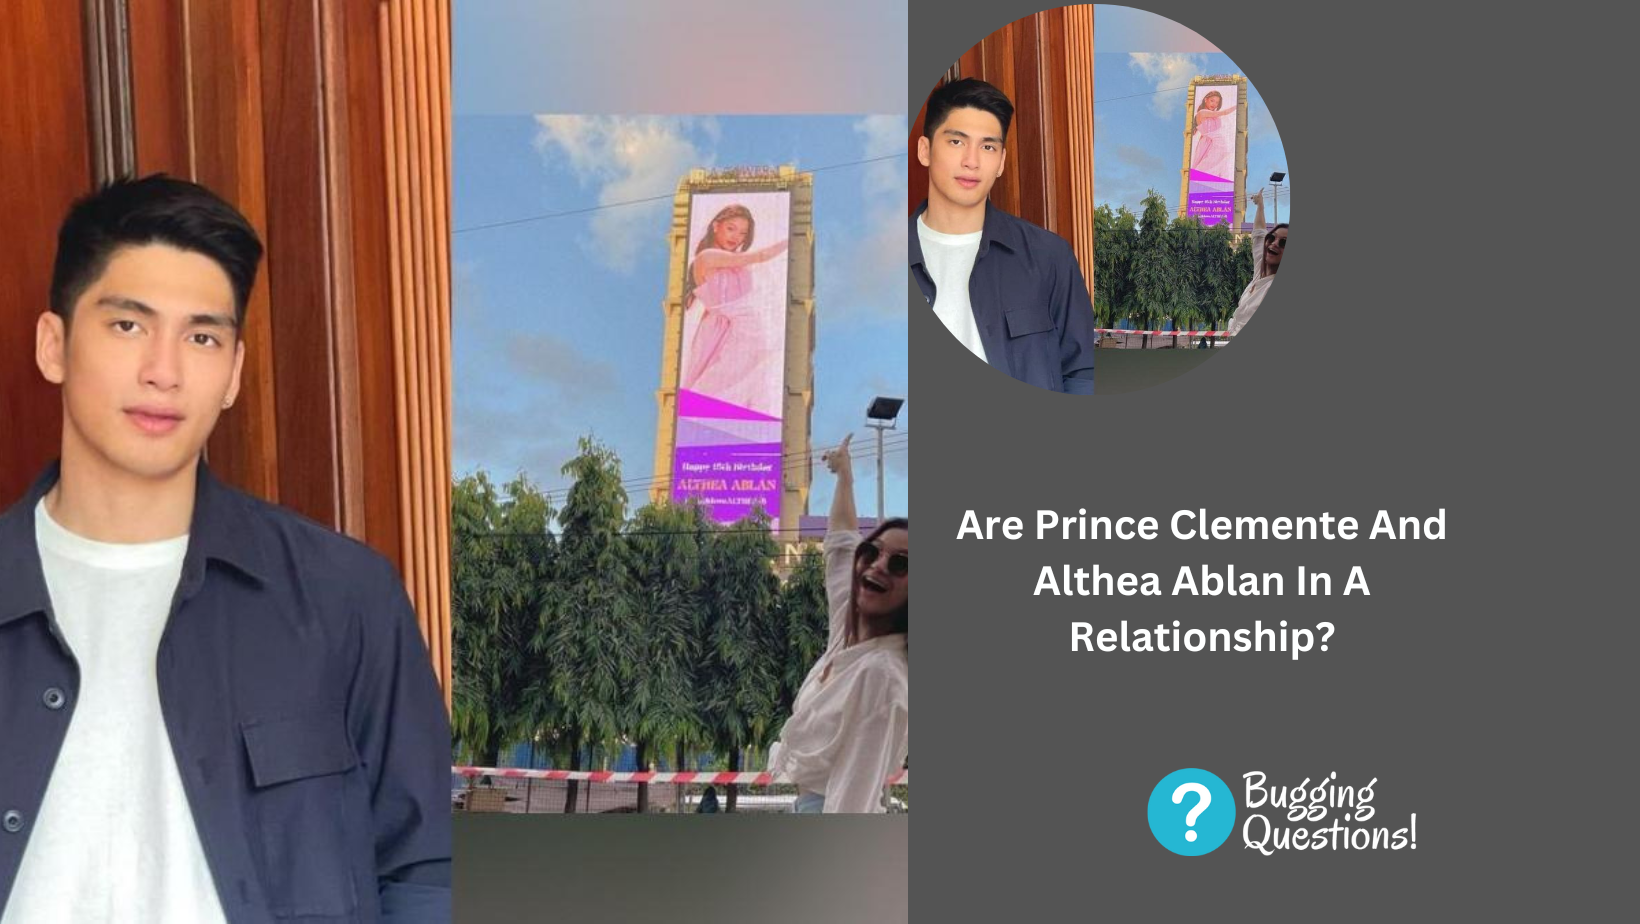 Are Prince Clemente And Althea Ablan In A Relationship?